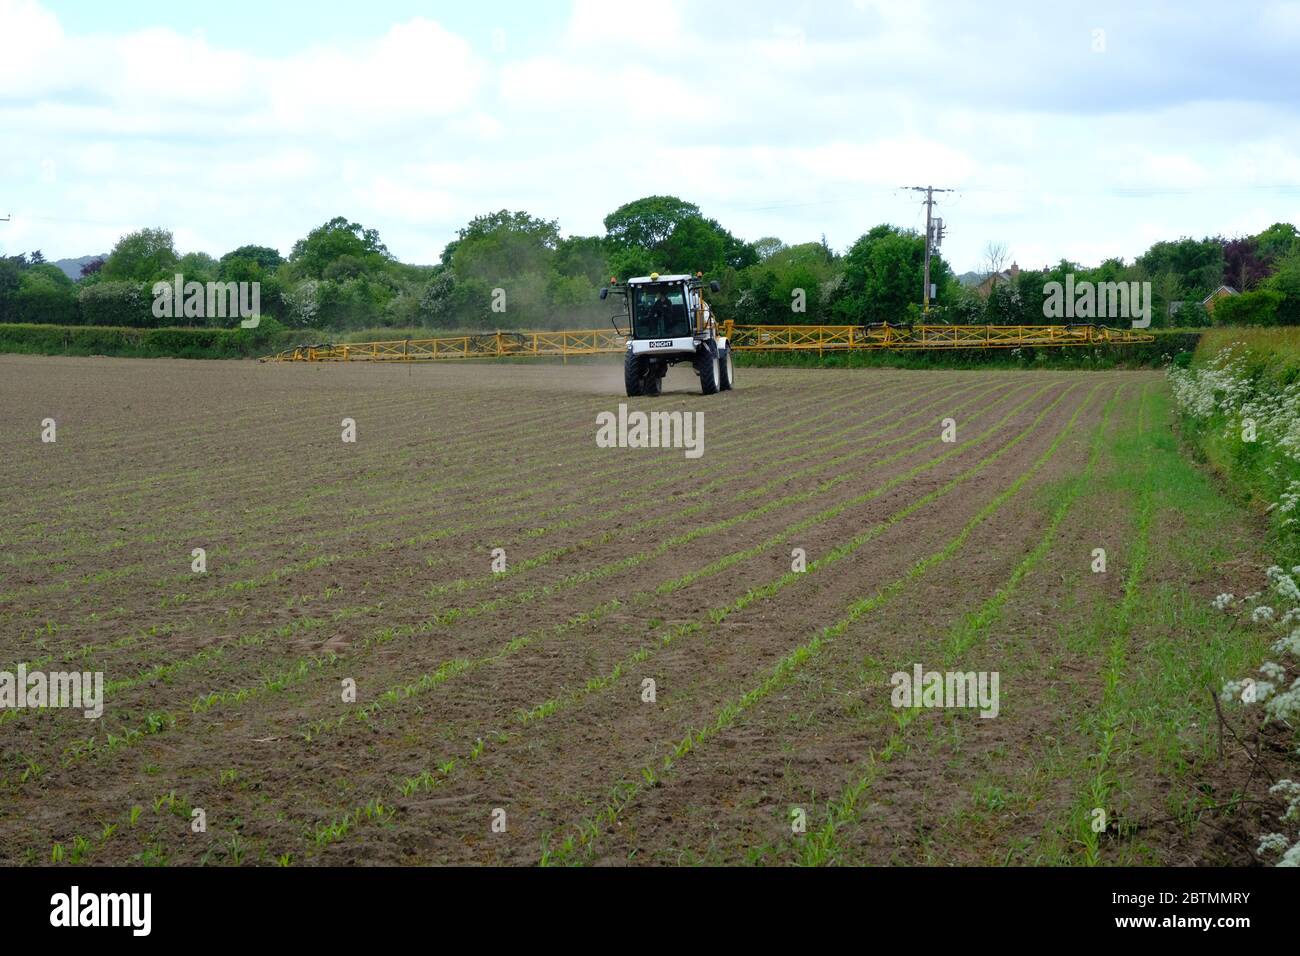 Farm Contractor, Spraying spring sown maize, Agriculture, Farming, Tractor, Chemical, Tending Crops, Maize Crop, Cultivating, Hedge, Hedgerow, Cheshir Stock Photo